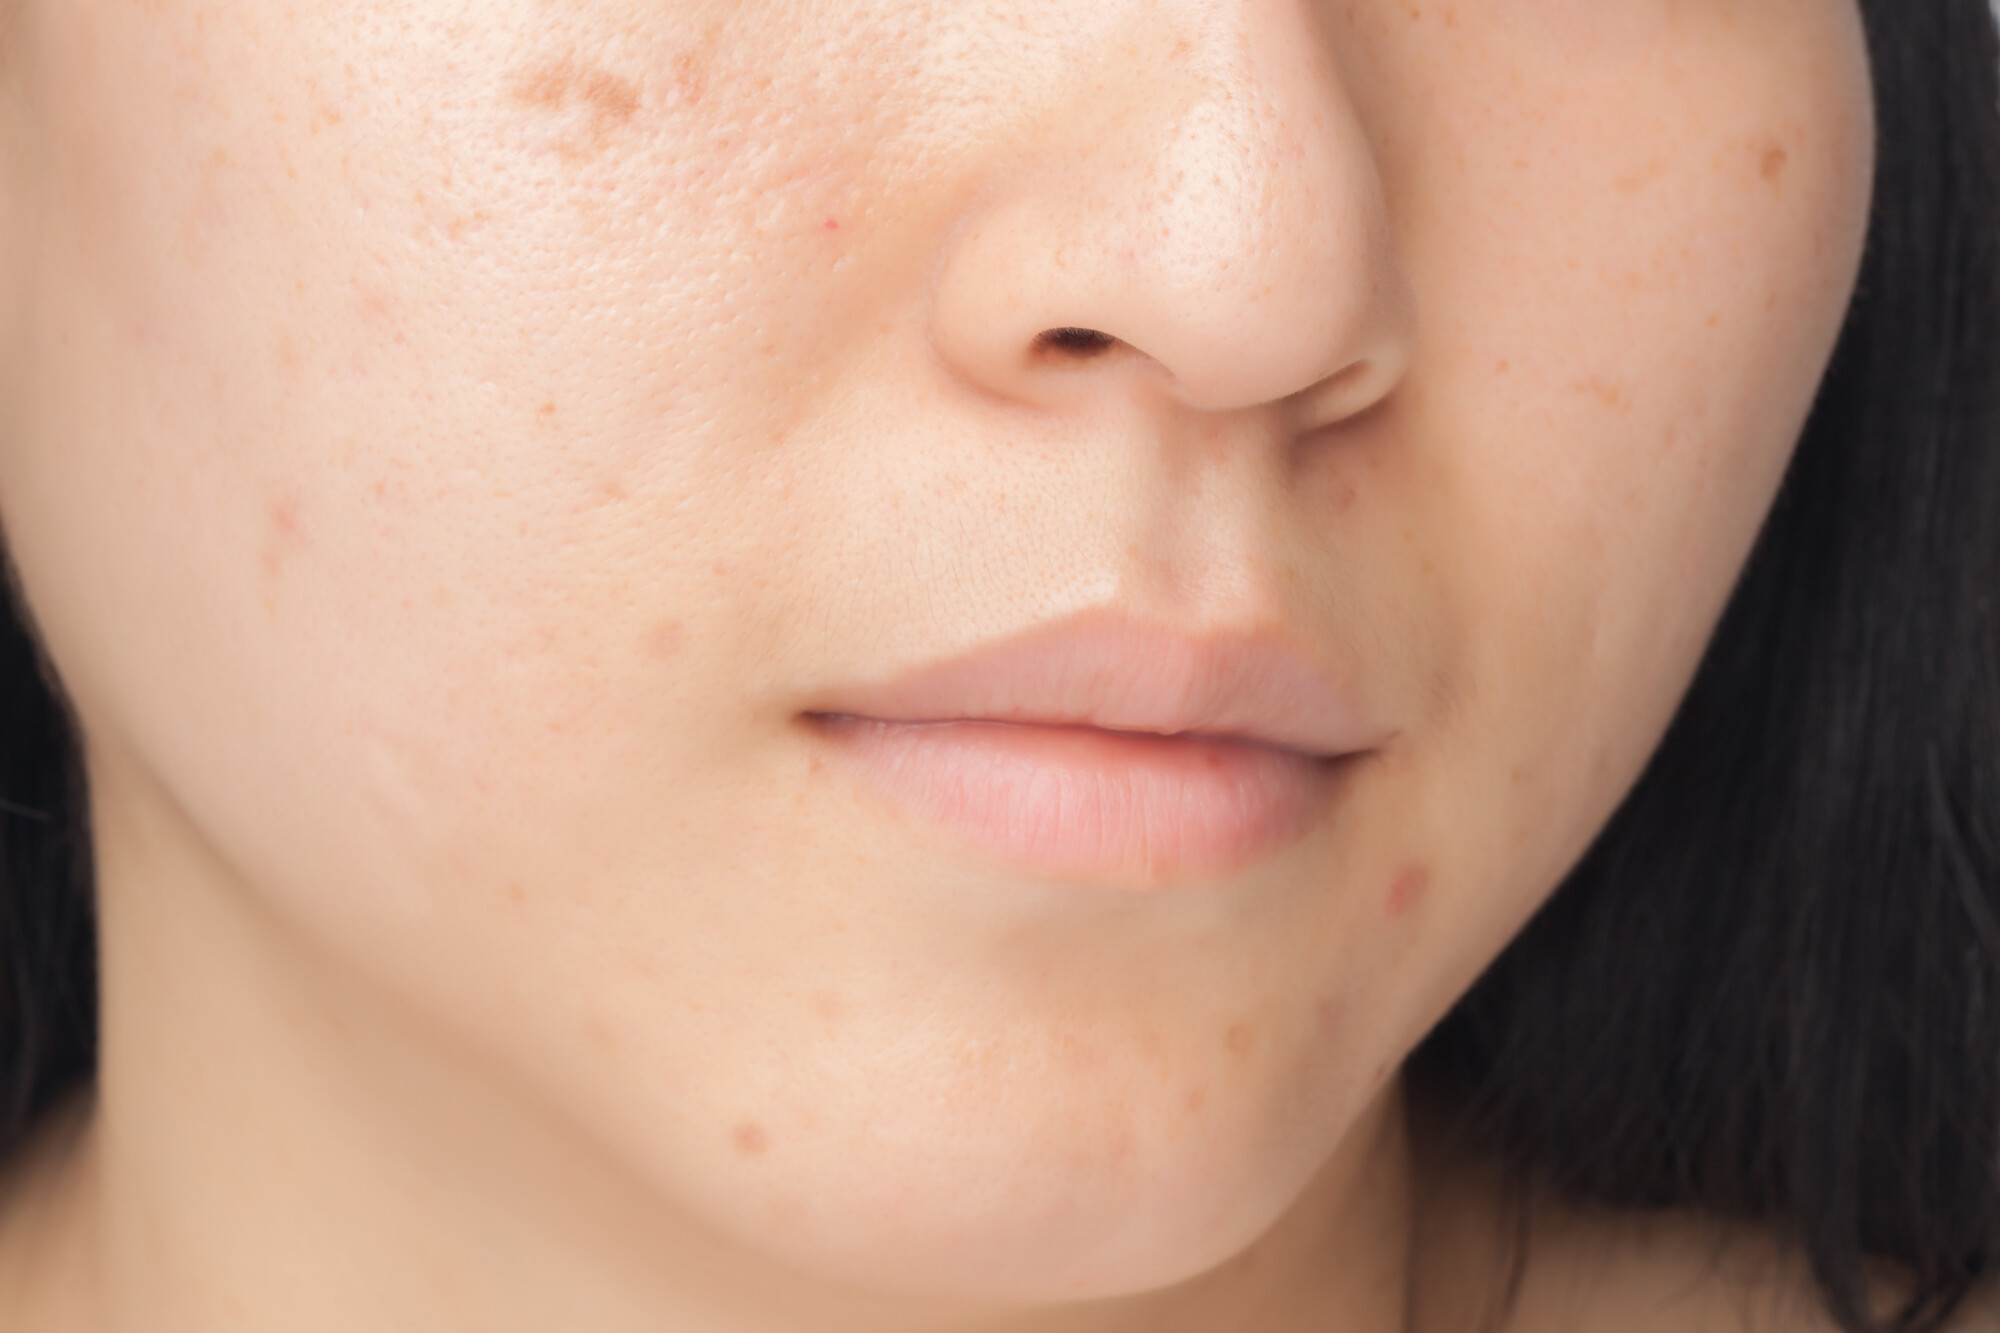 What Are the Different Causes of Damaged Skin?